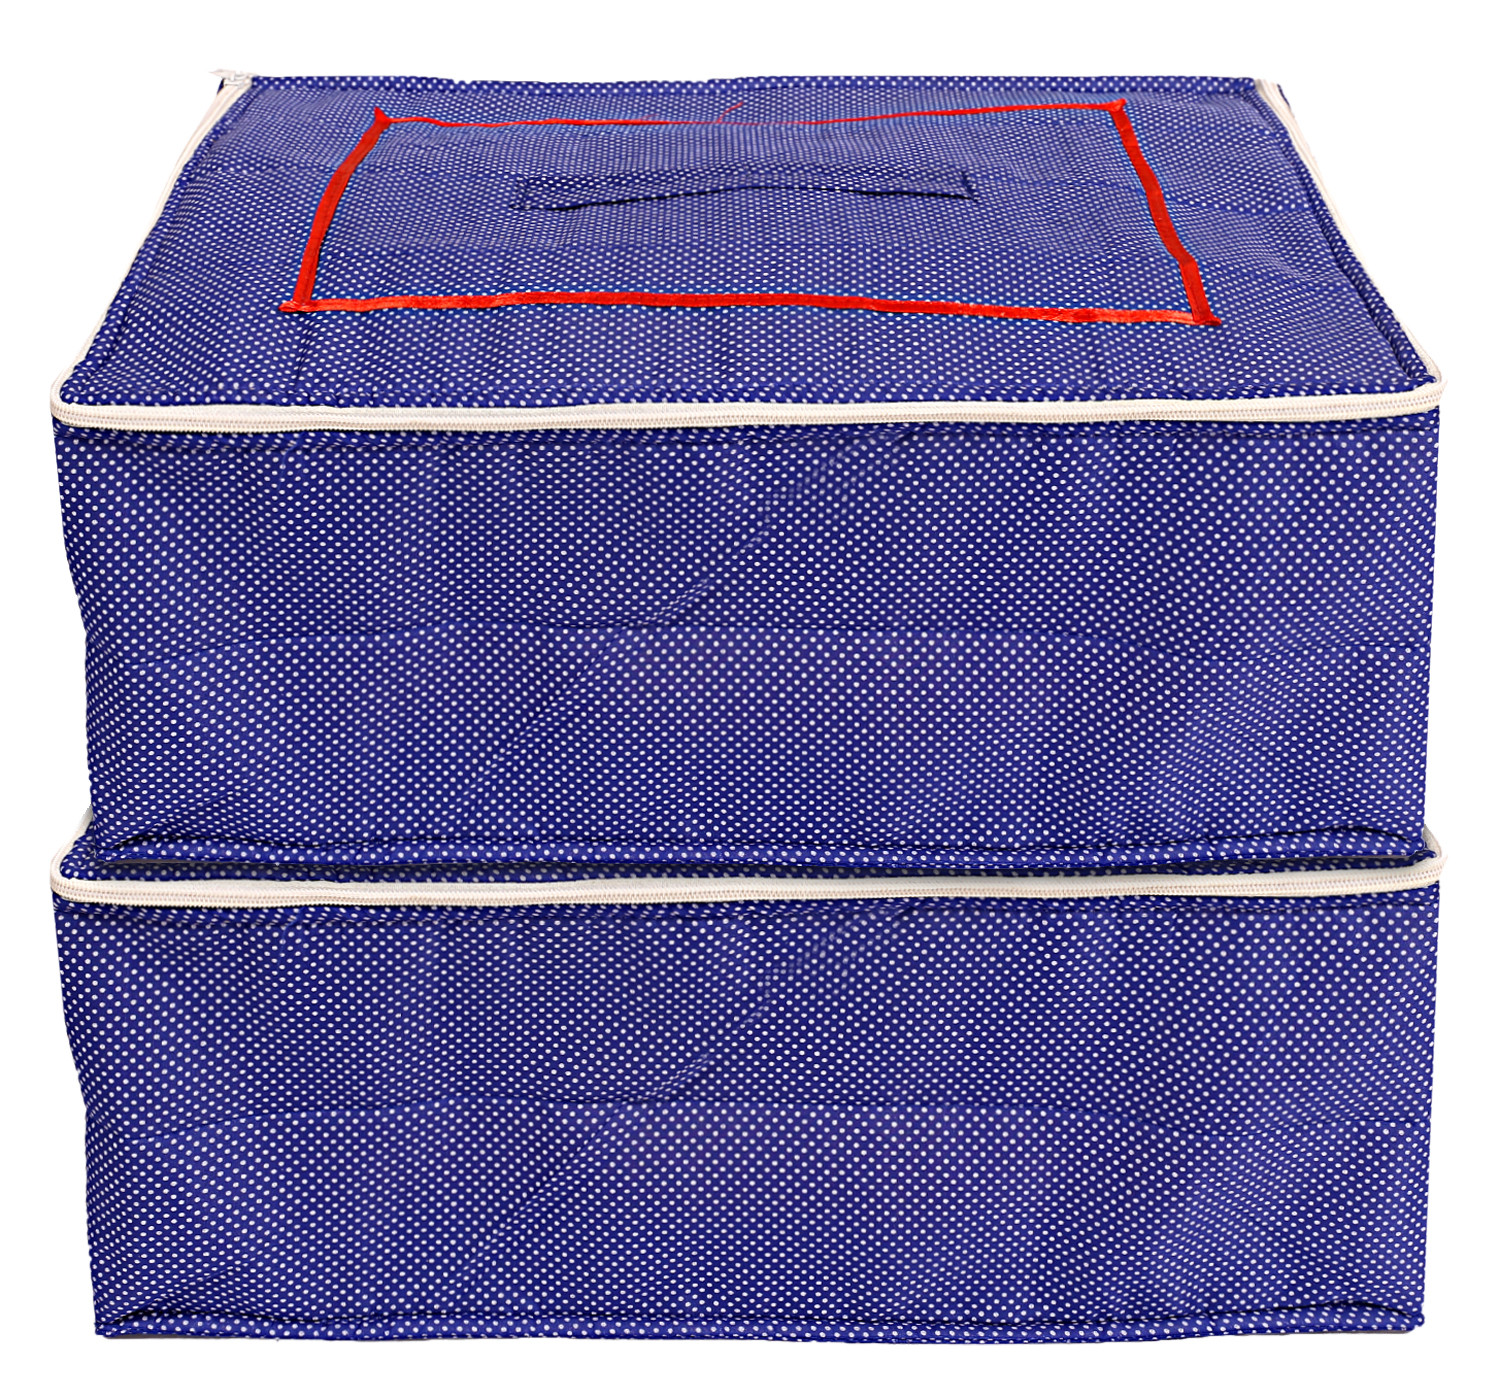 Kuber Industries Dot Printed Cotton Saree Cover, Clothes Organiser For Wardrobe, Storage Bag, Regular Clothes Storage Bag With Handle on Top(Blue)-HS_38_KUBMART20961